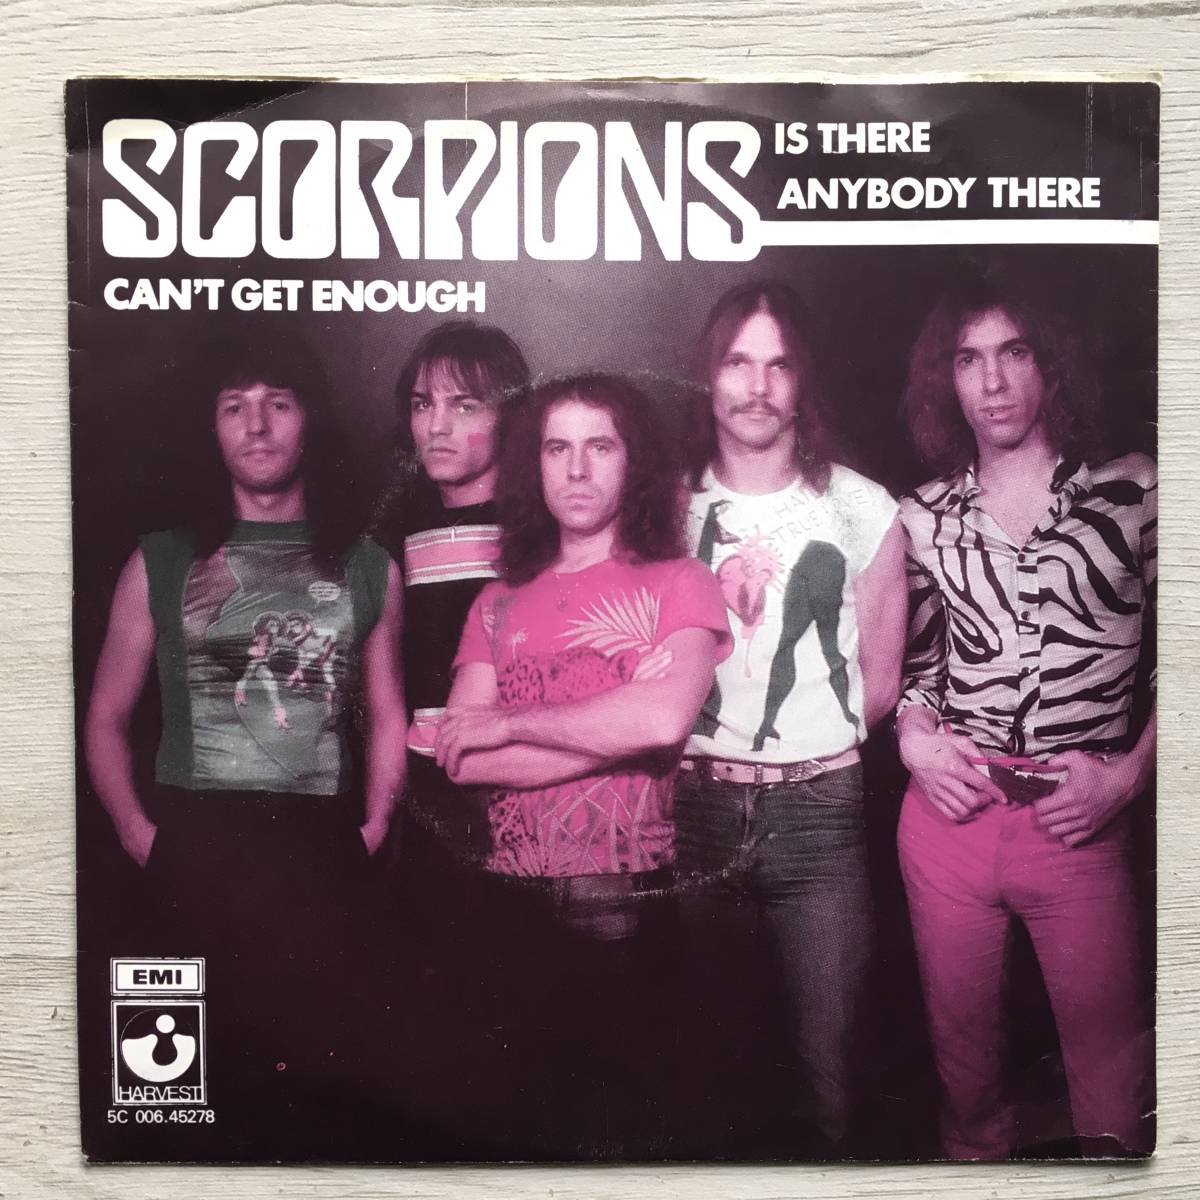 SCORPIONS IS THERE ANYBODY THERE オランダ盤_画像2